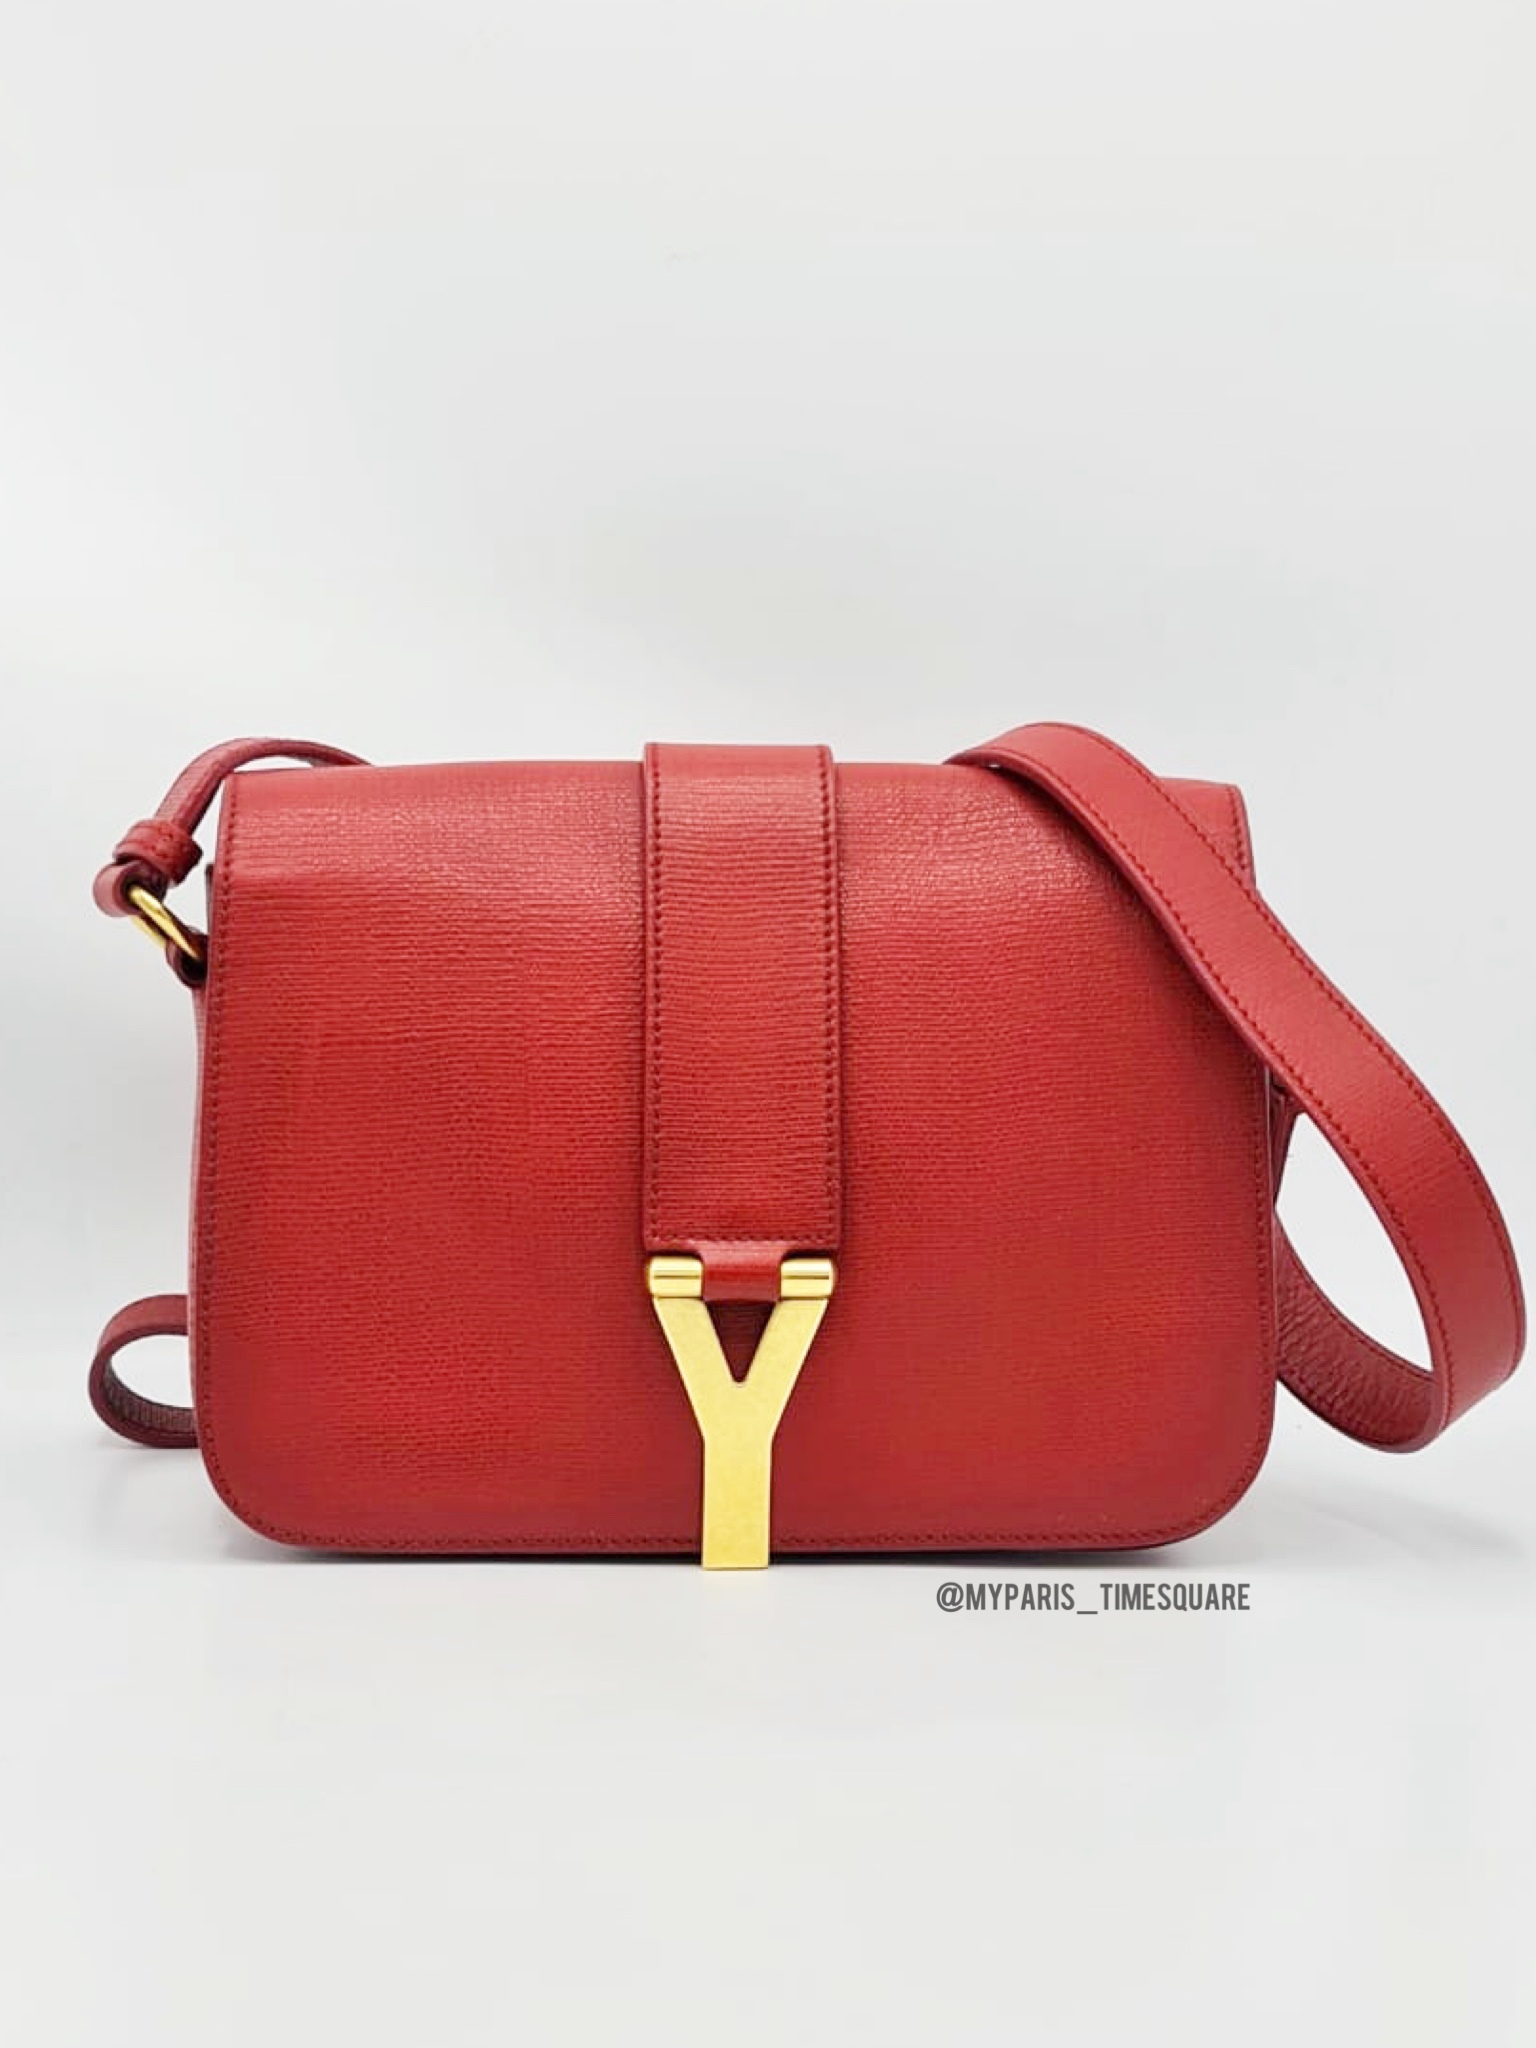 Yves Saint Laurent Red Textured Leather Medium Chyc Flap Bag – My Paris  Branded Station-Sell Your Bags And Get Instant Cash